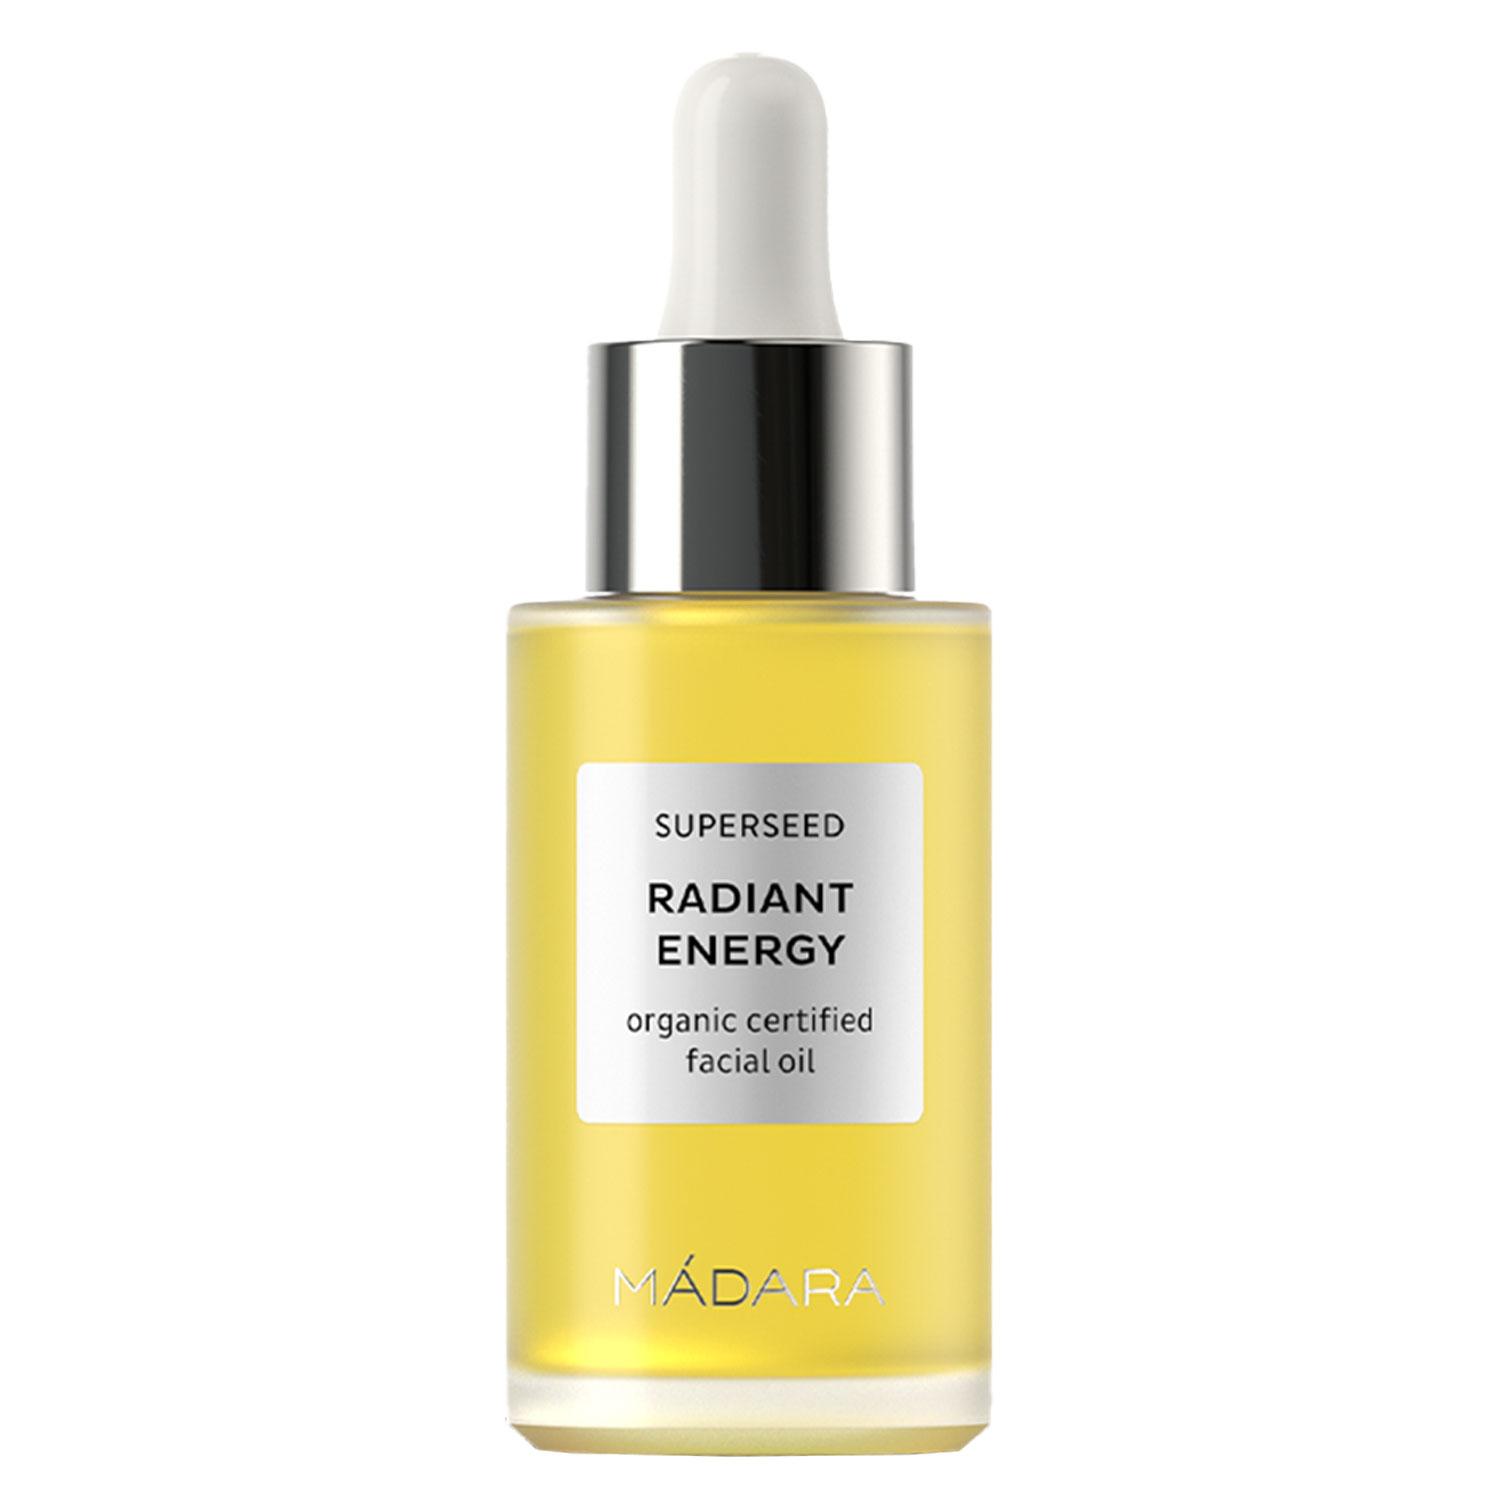 MÁDARA Care - Superseed Radiant Energy Facial Oil